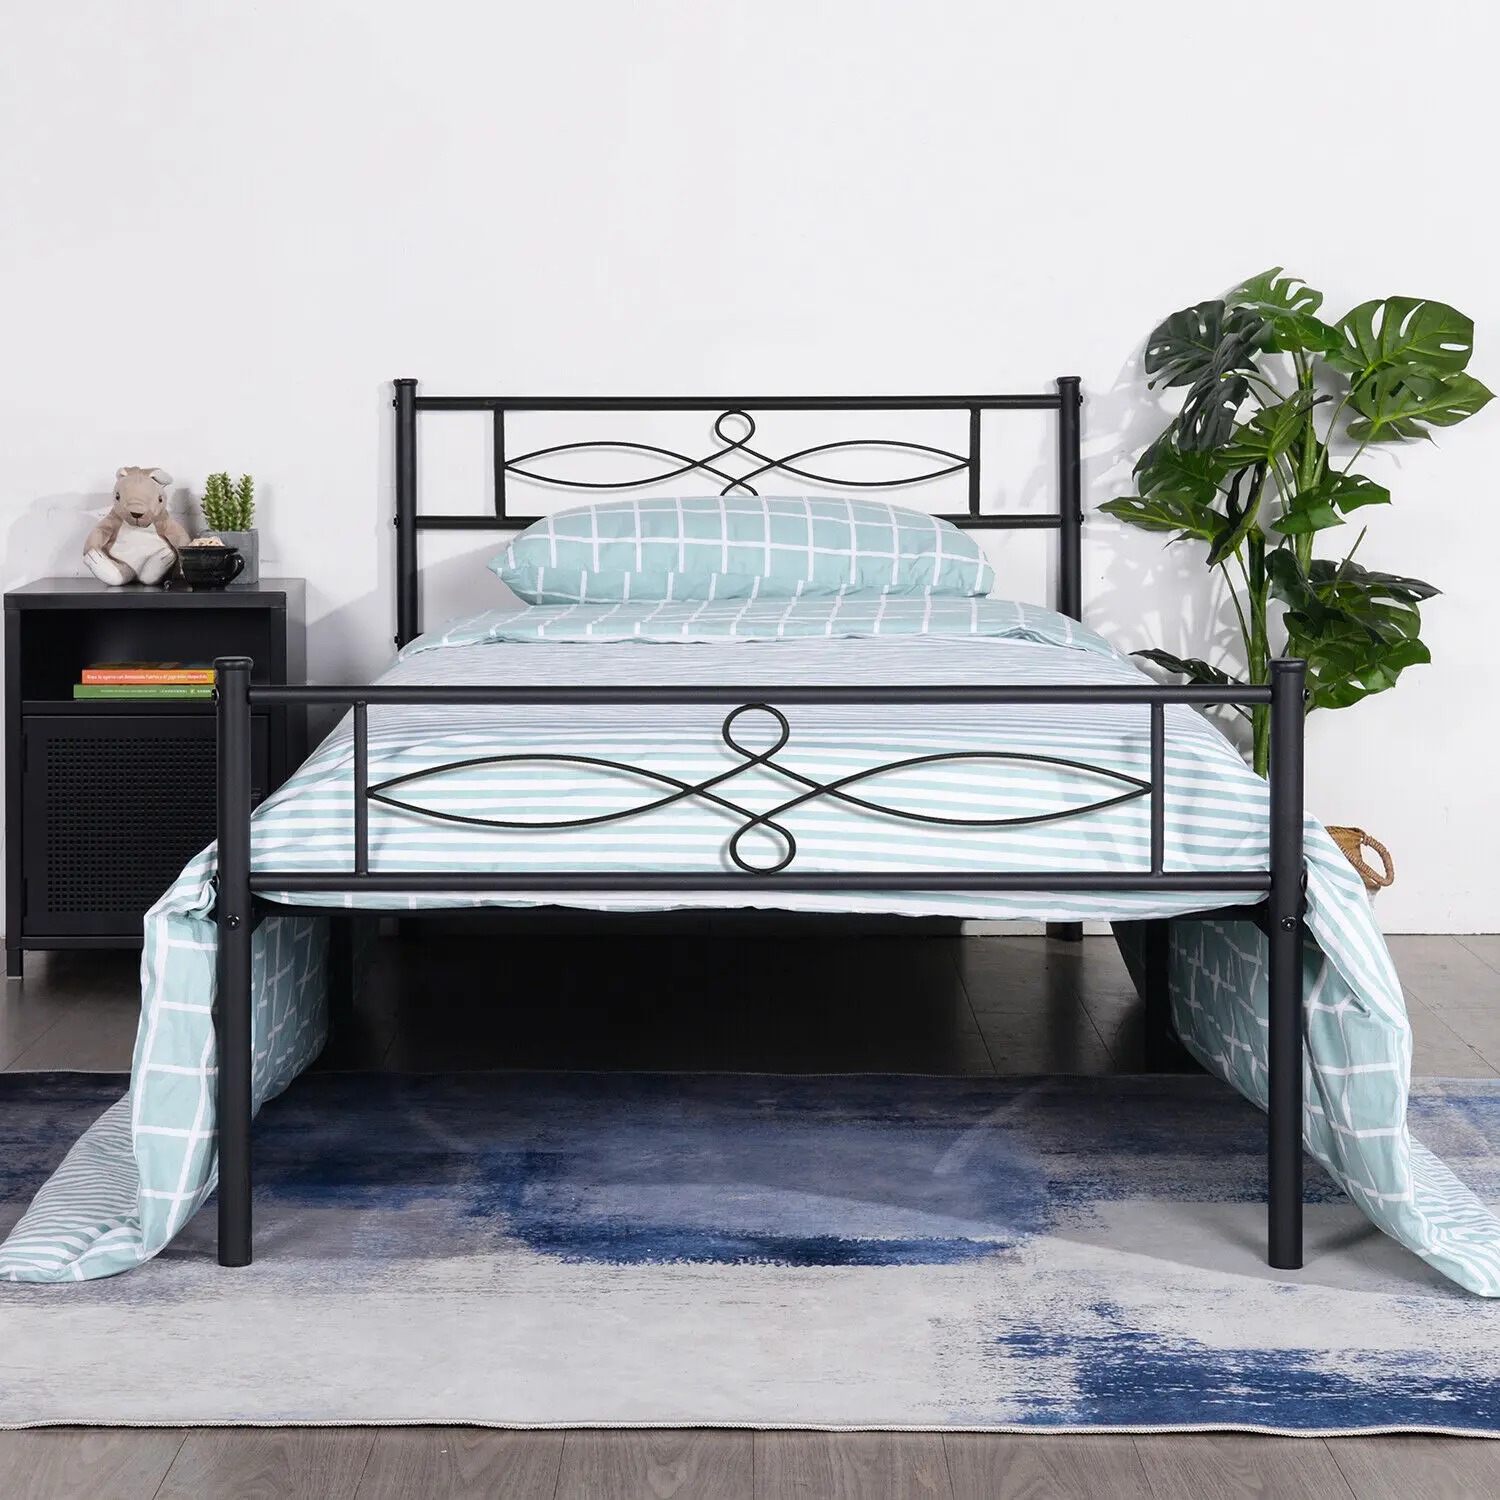 Hot sell metal bed frame /iron bed frame/King /queen/kid sized bedroom furniture